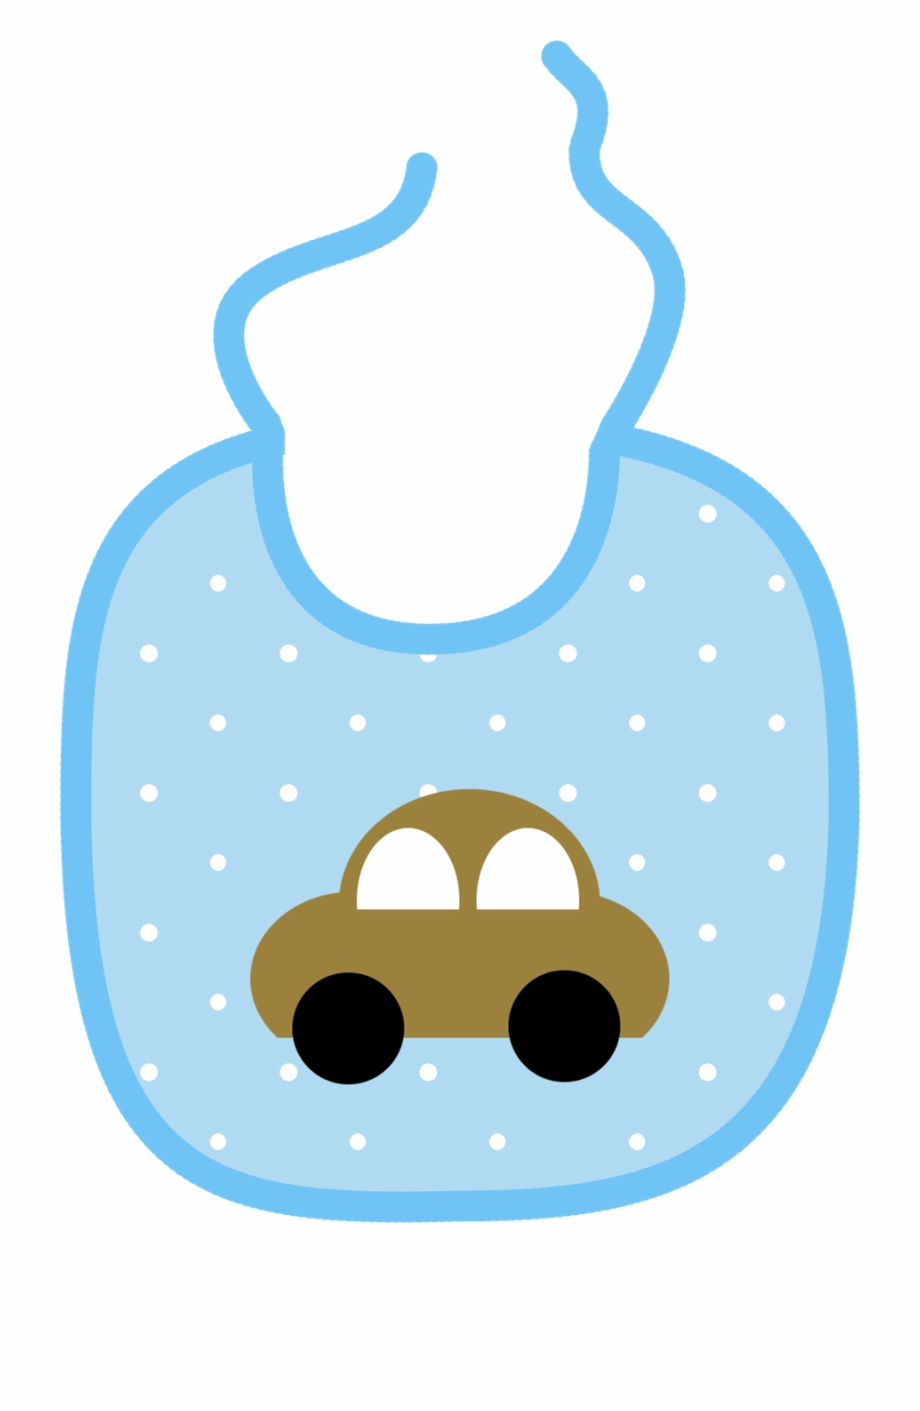 Freeuse Stock Baby In Blanket Clipart Bib Clipart